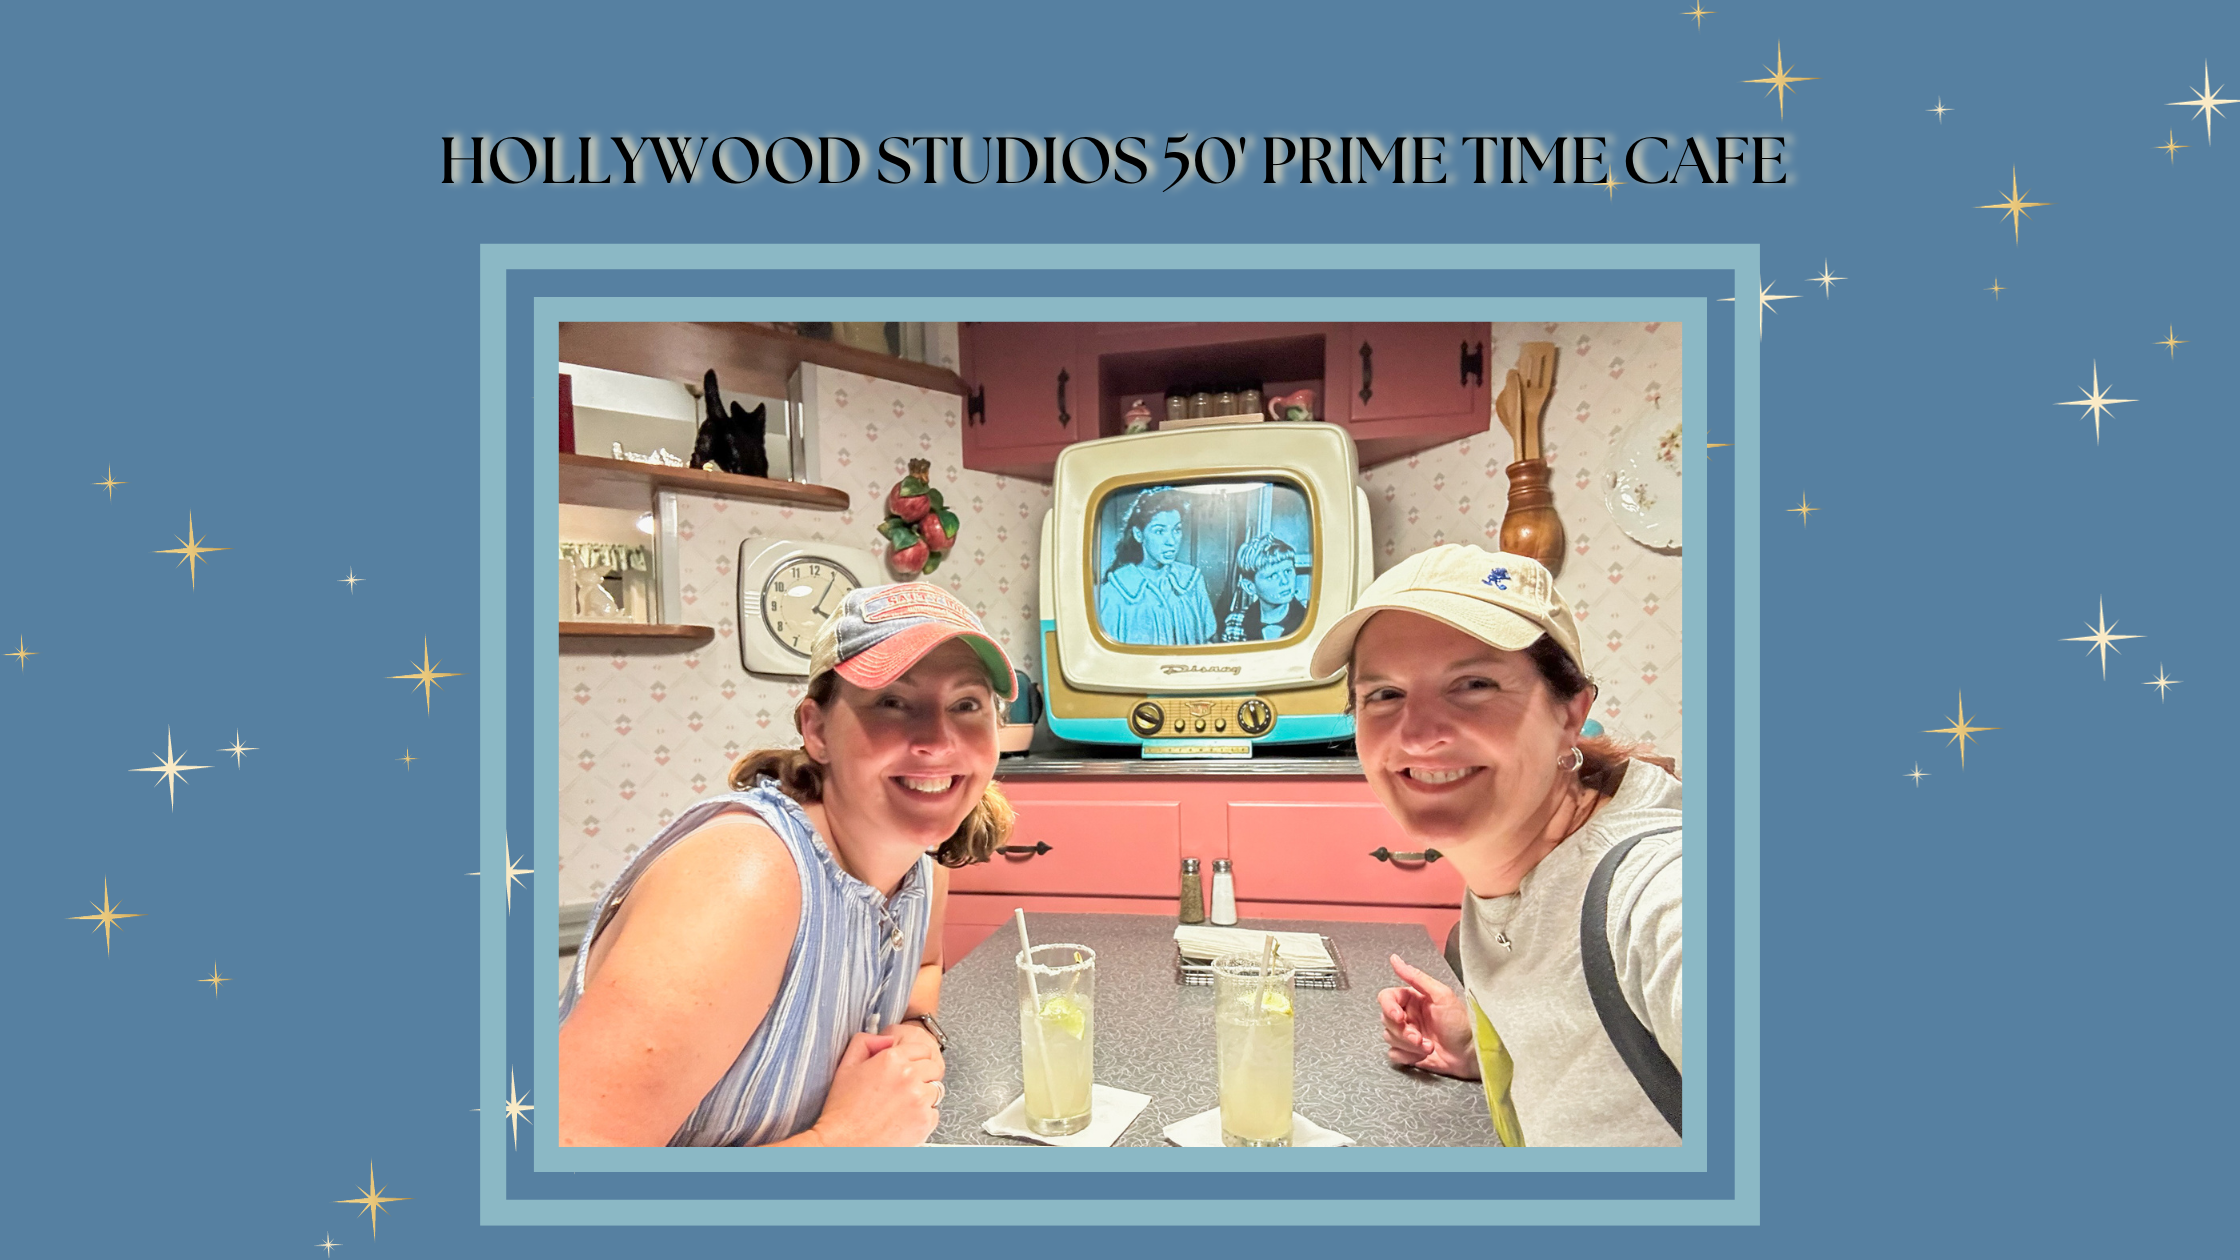 Hollywood Studios 50’s Prime Time Cafe